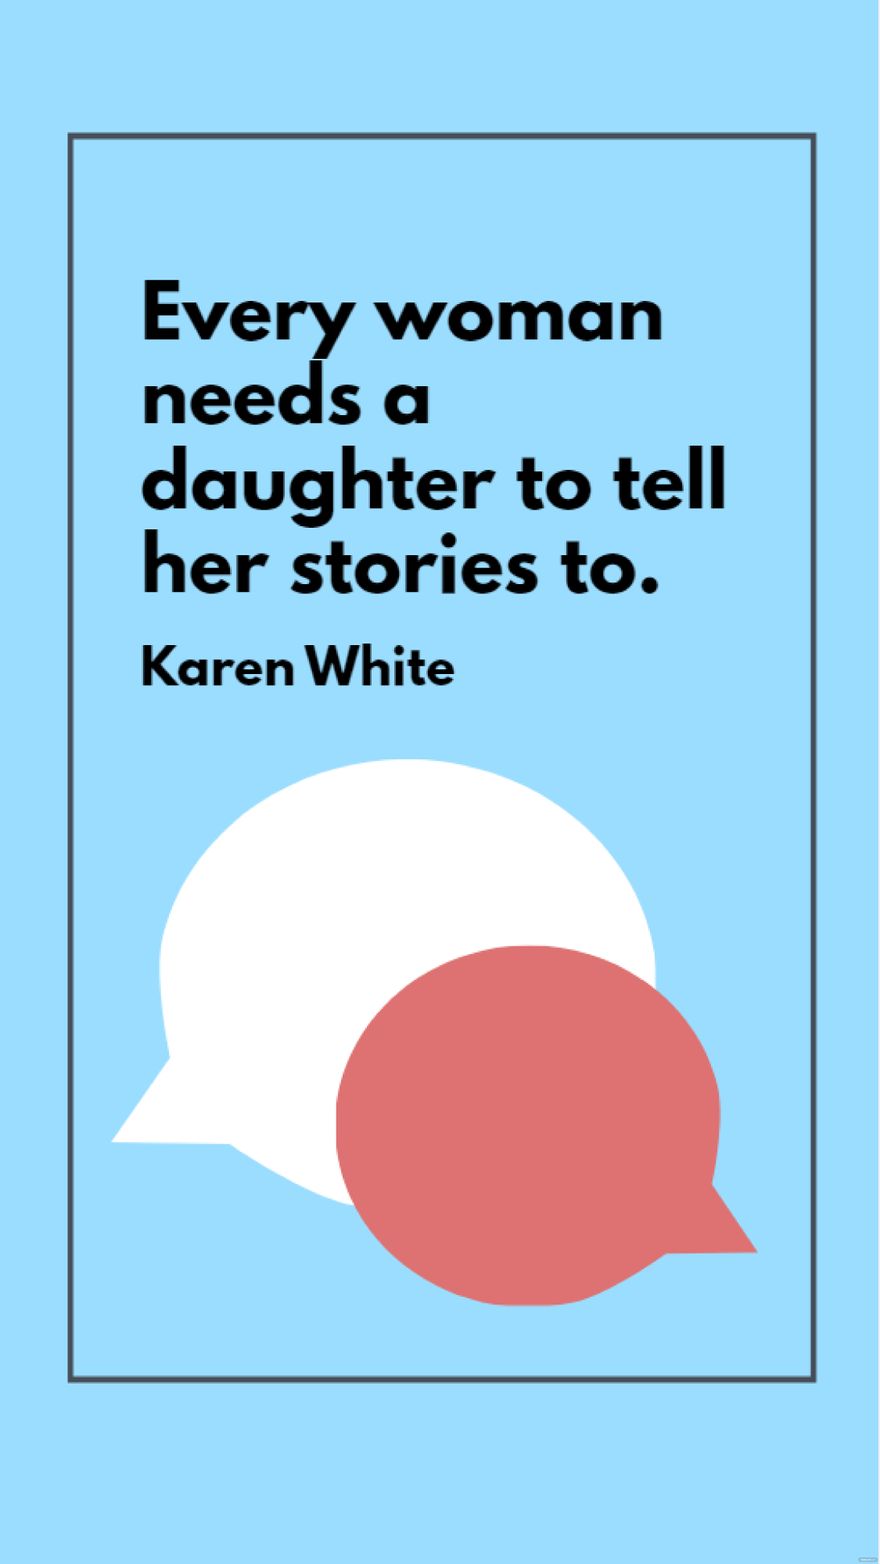 Free Karen White - Every woman needs a daughter to tell her stories to. in JPG